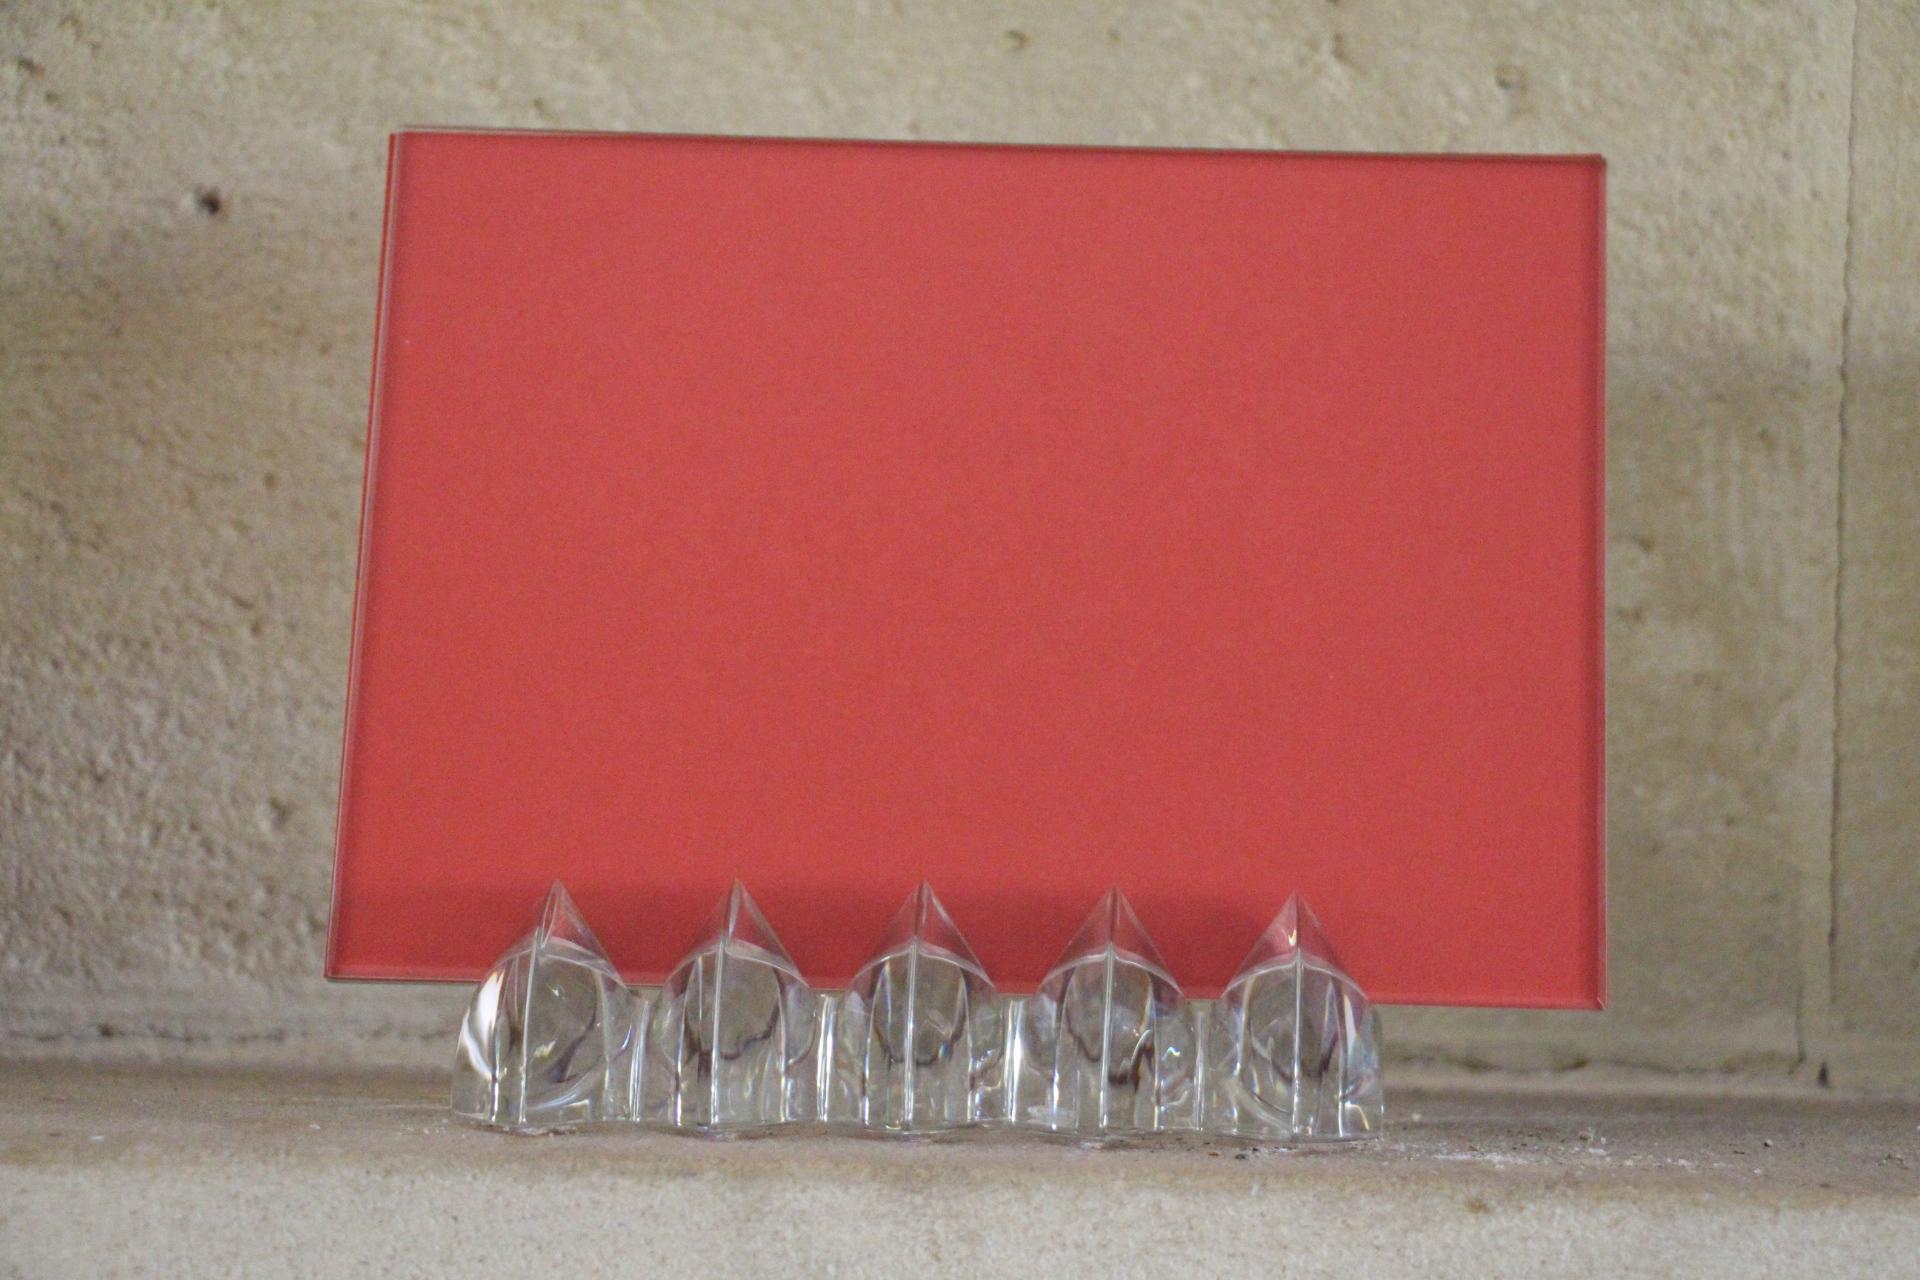 French Brand New Crystal Picture Frame by Baccarat, Baccarat Crystal Frame For Sale